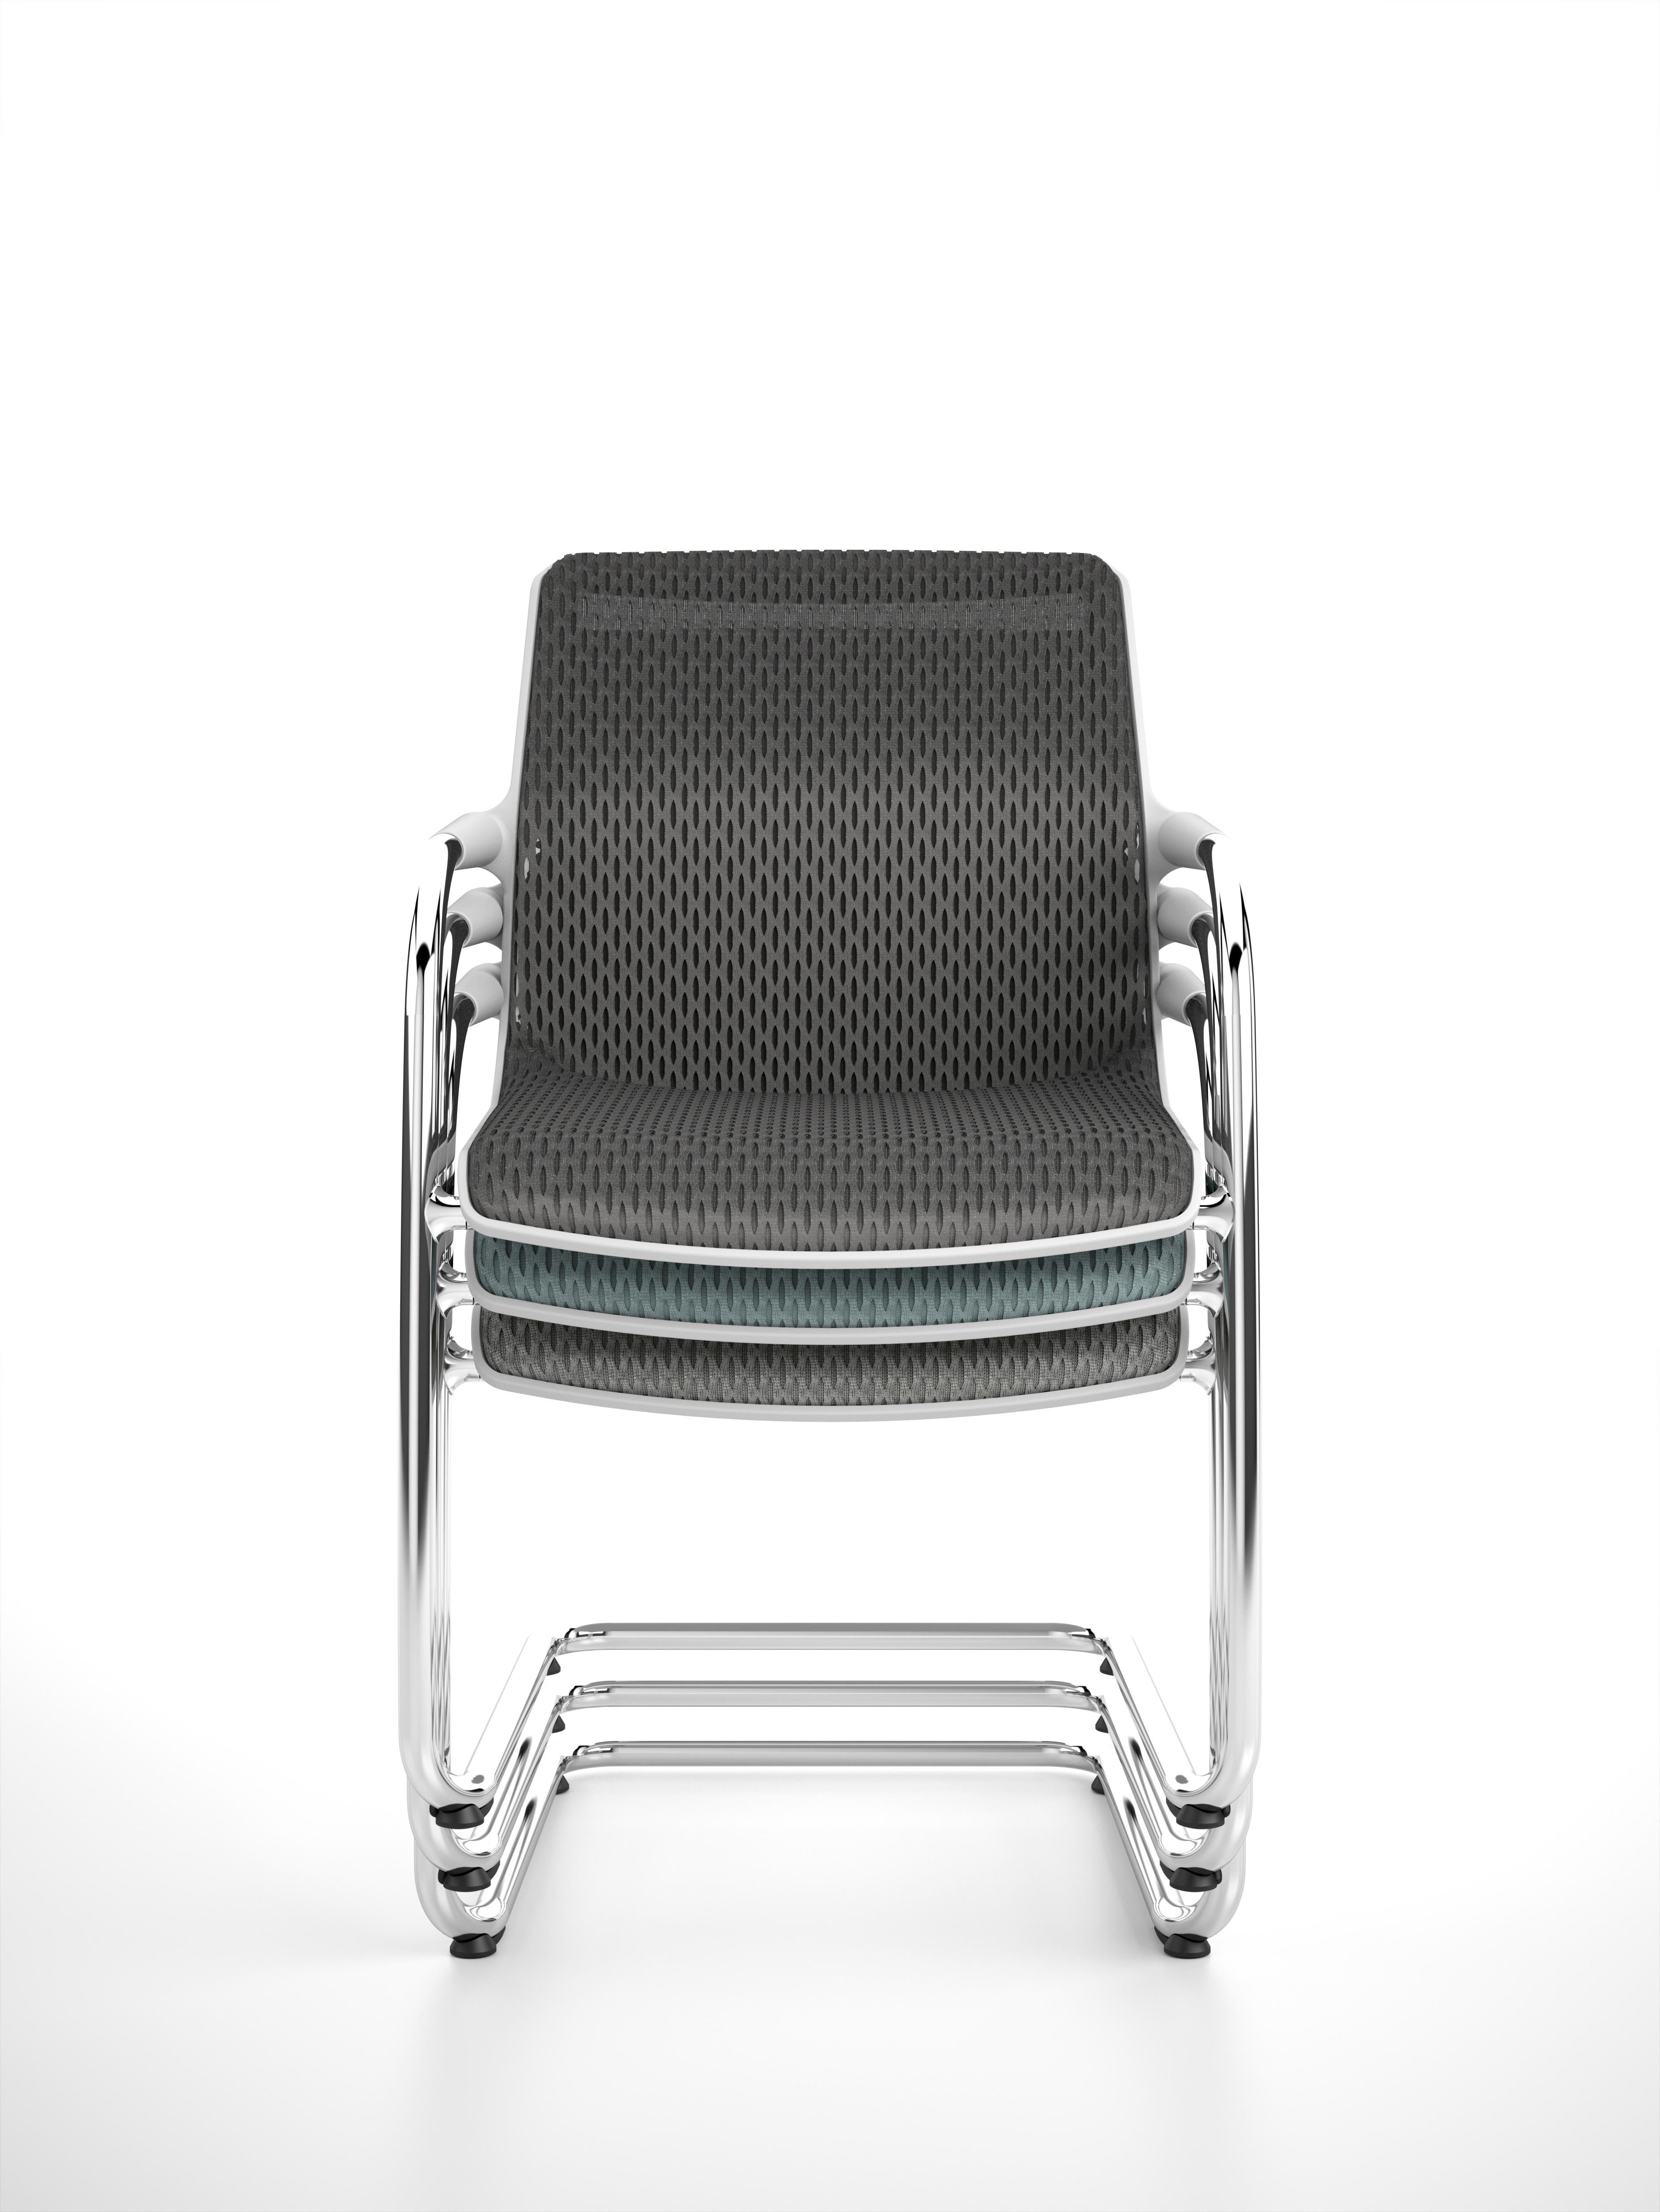 Vitra Unix Cantilever Stackable Chair in Brick Silk Mesh by Antonio Citterio im Angebot 1